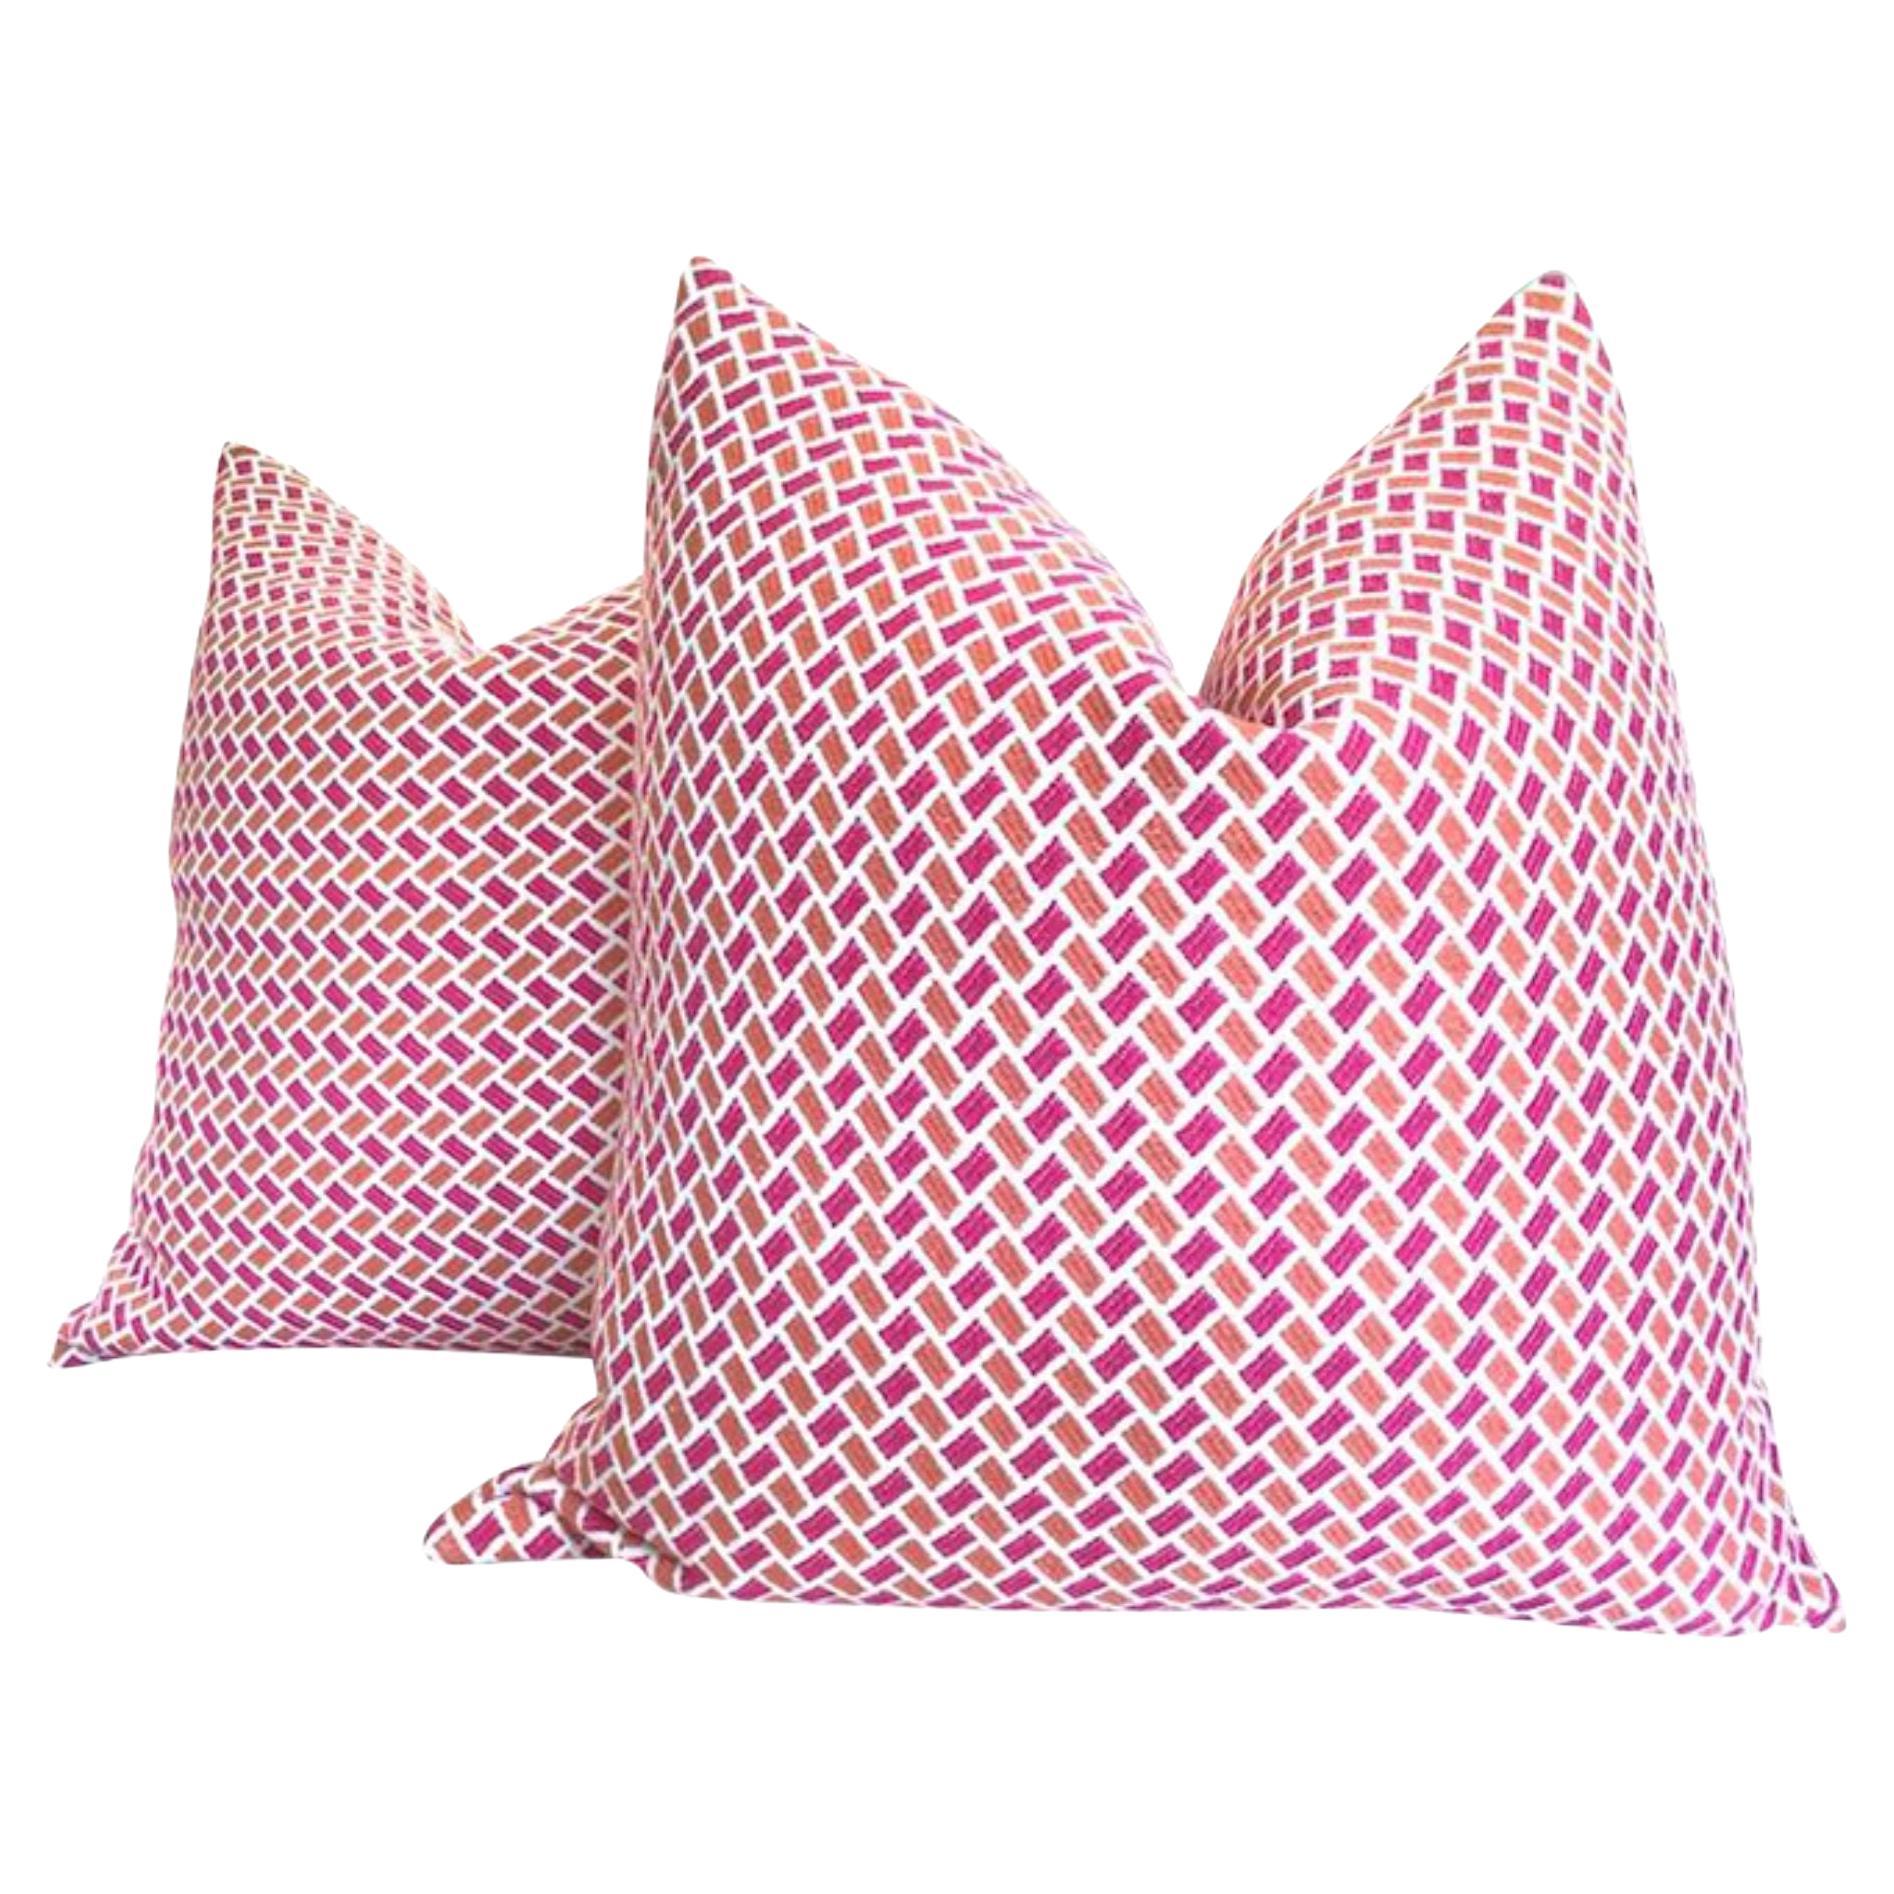 Brunschwig & Fils “Briquetage” in Hot Pink & Coral Orange Pillows - a Pair For Sale